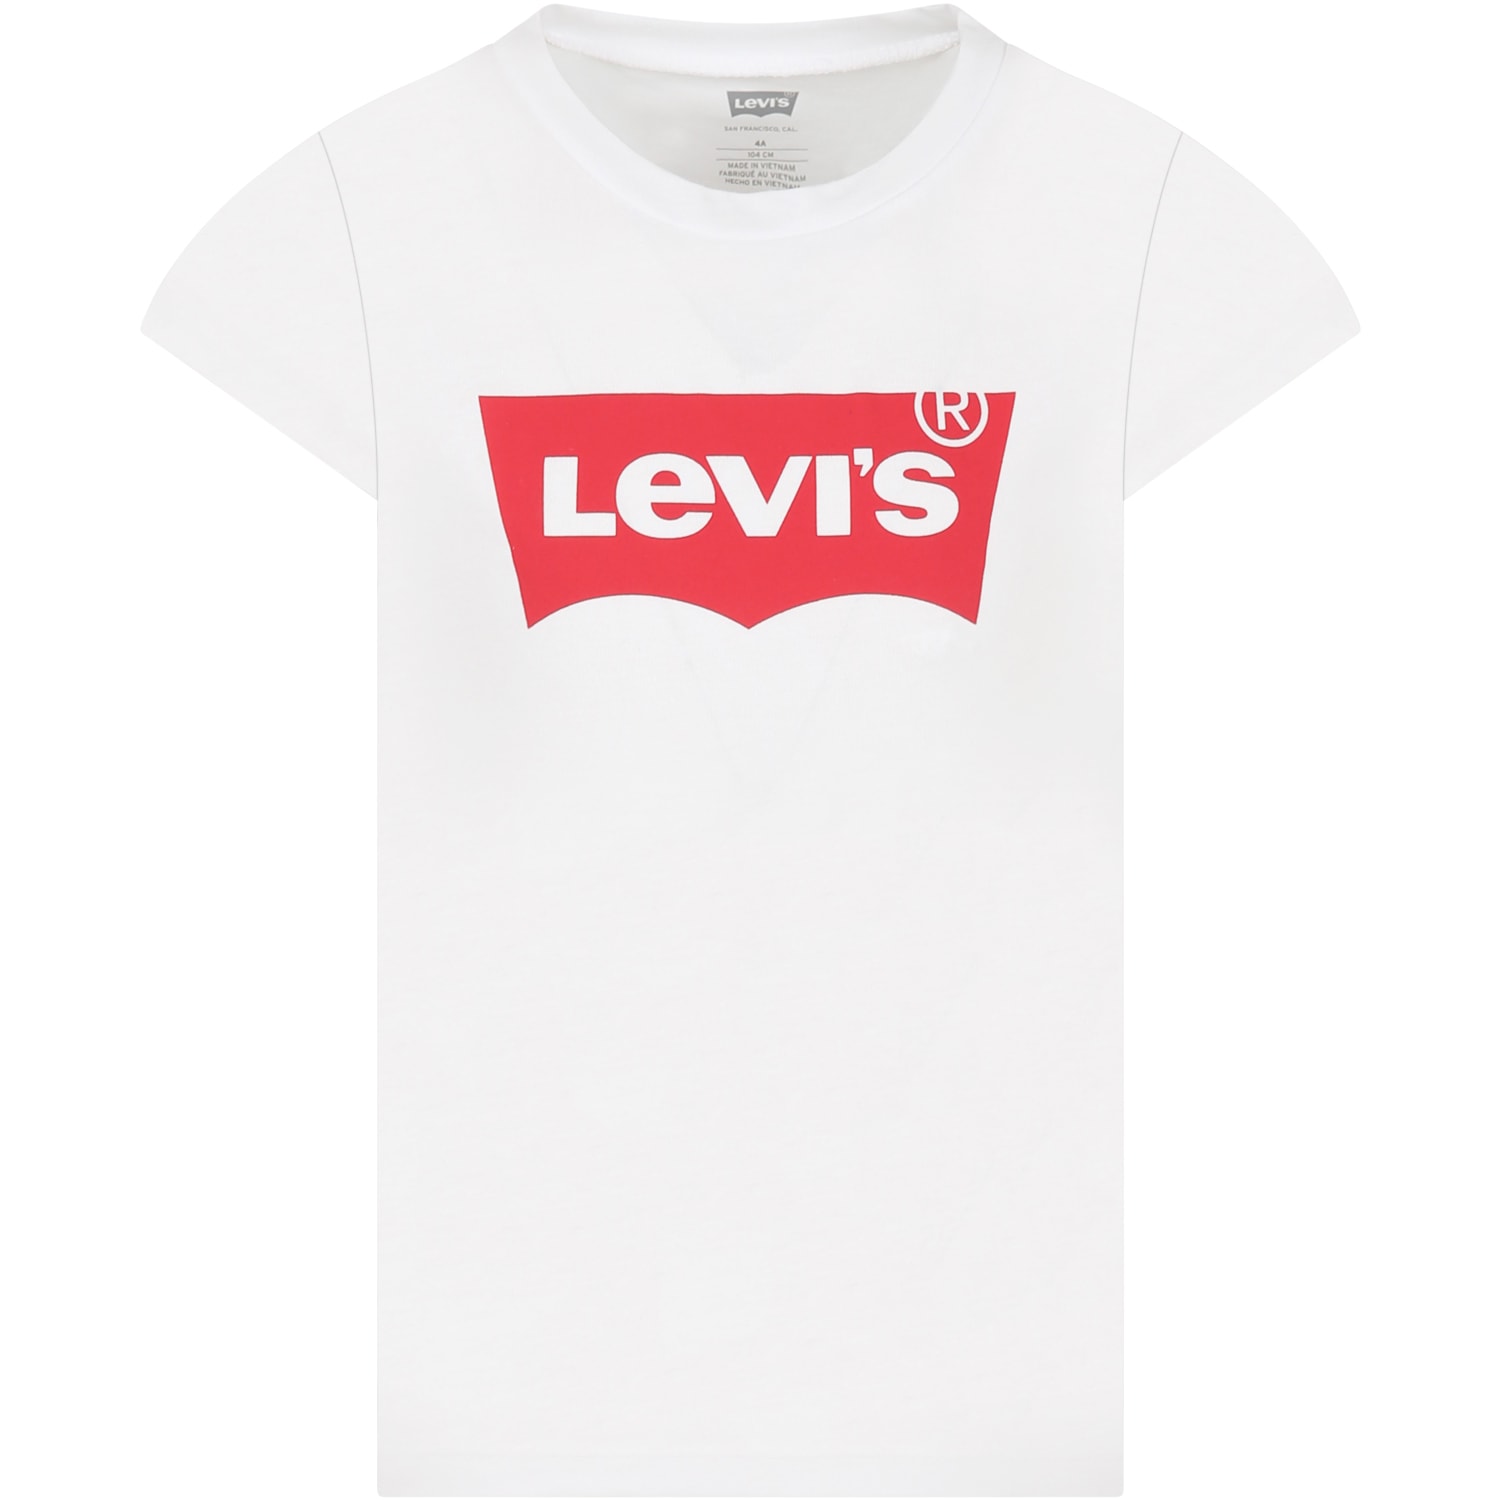 Levi's Kids' White T-shirt For Boy With Logo